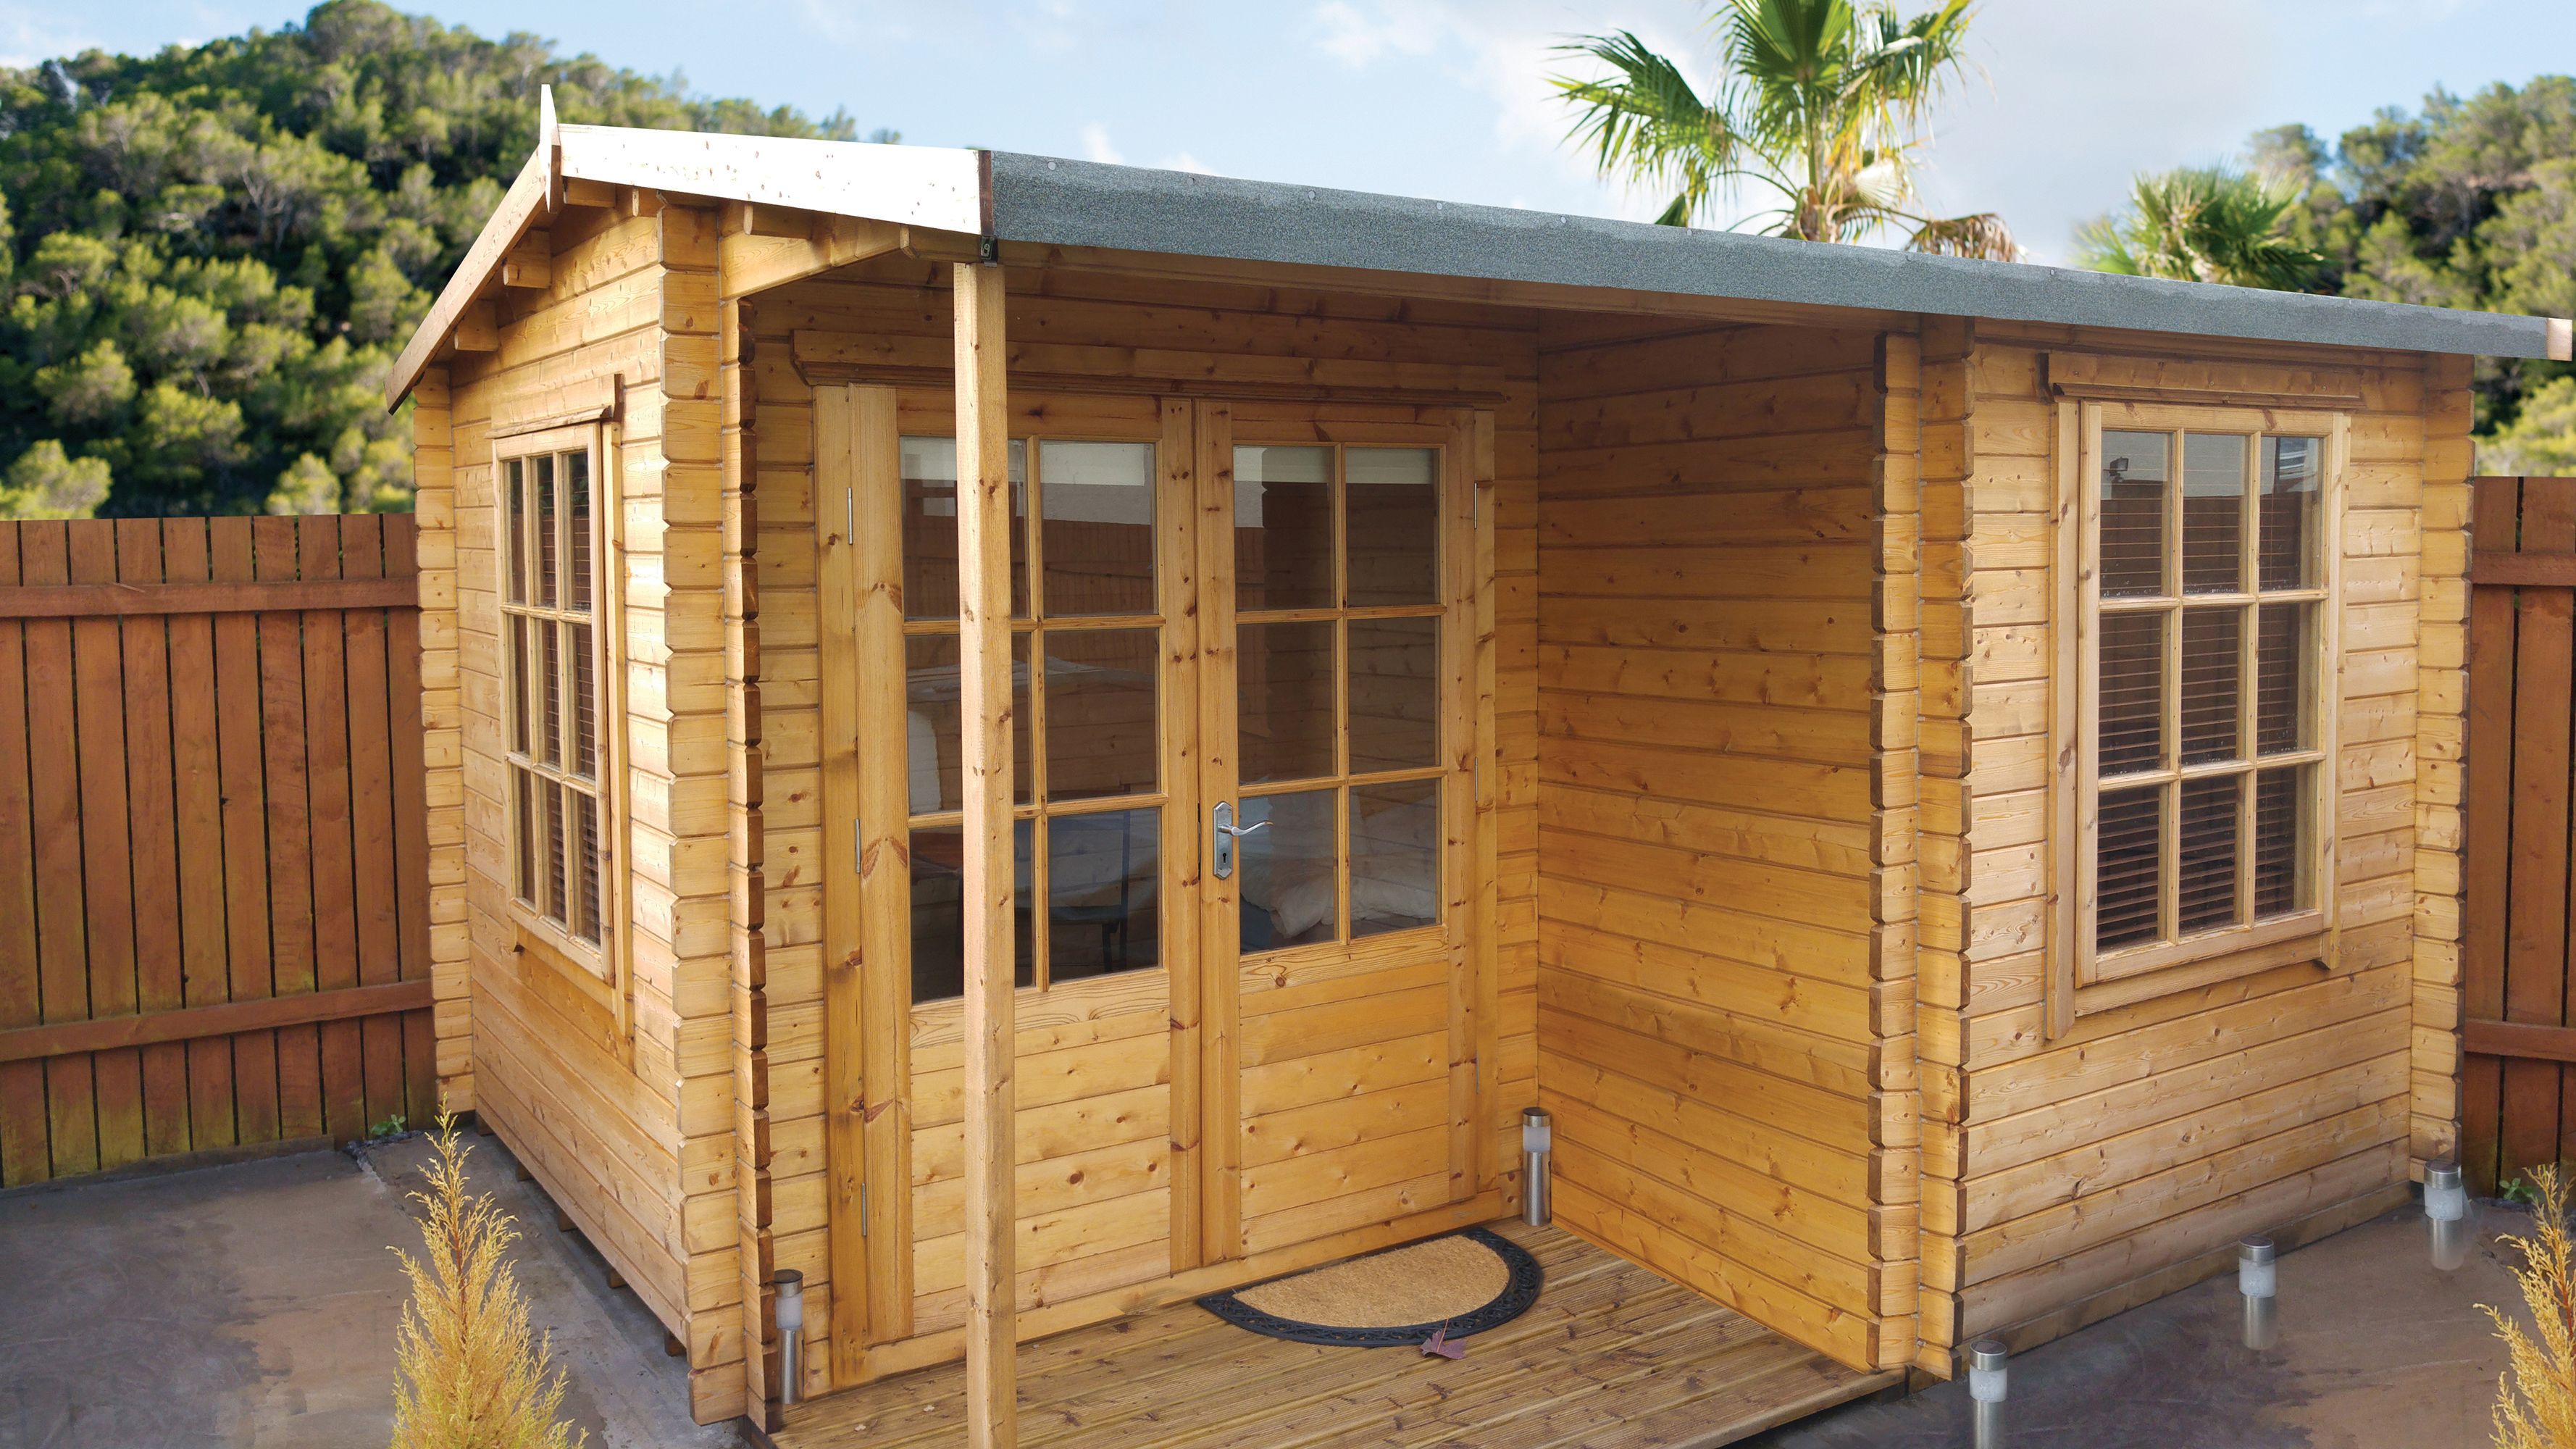 Image of Shire Ringwood 12 x 13ft Double Door Log Cabin including Covered Porch with Assembly